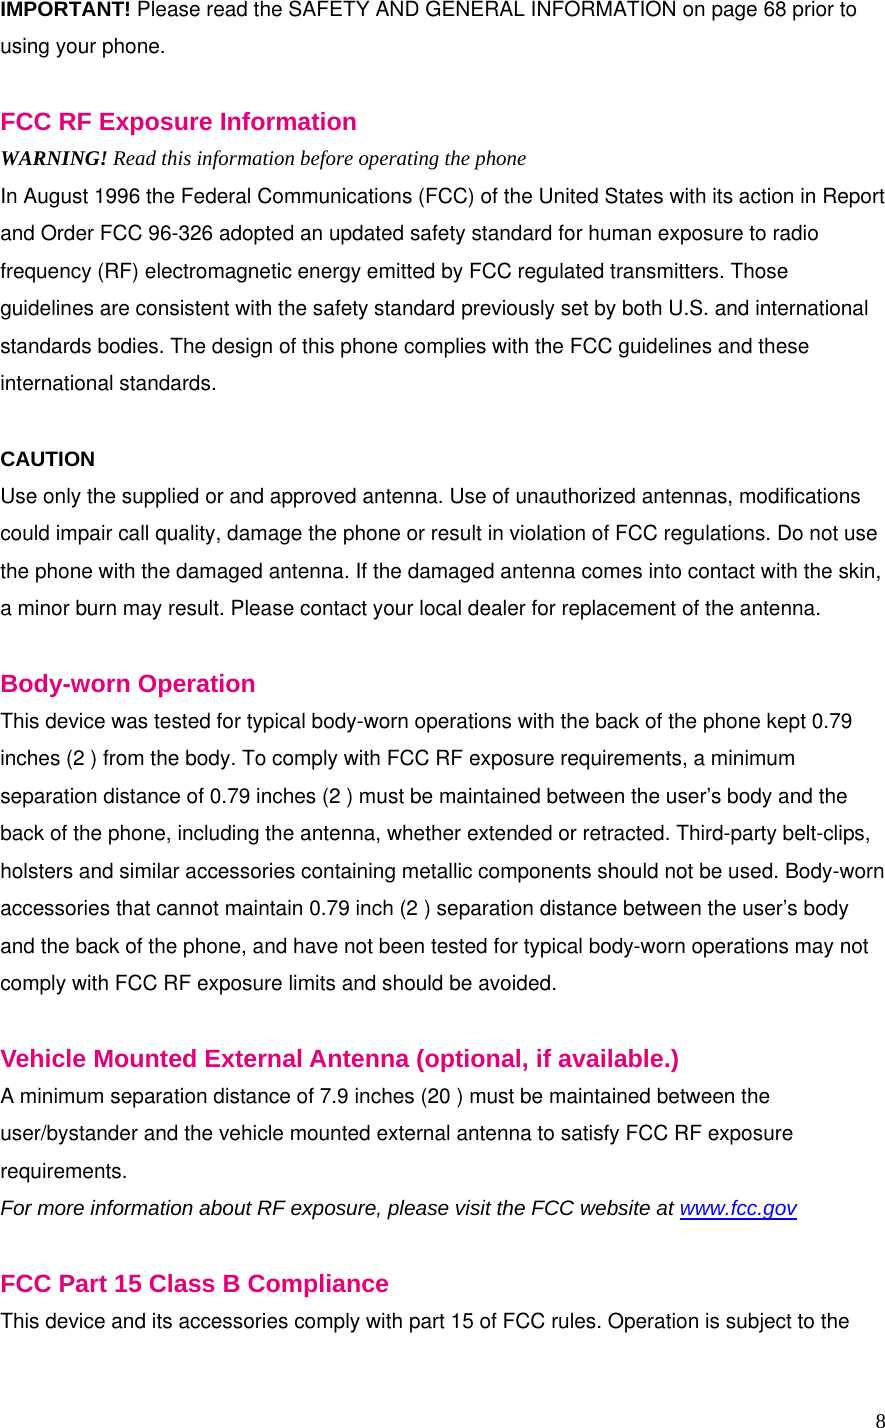 8 IMPORTANT! Please read the SAFETY AND GENERAL INFORMATION on page 68 prior to using your phone.  FCC RF Exposure Information WARNING! Read this information before operating the phone In August 1996 the Federal Communications (FCC) of the United States with its action in Report and Order FCC 96-326 adopted an updated safety standard for human exposure to radio frequency (RF) electromagnetic energy emitted by FCC regulated transmitters. Those guidelines are consistent with the safety standard previously set by both U.S. and international standards bodies. The design of this phone complies with the FCC guidelines and these international standards.  CAUTION Use only the supplied or and approved antenna. Use of unauthorized antennas, modifications could impair call quality, damage the phone or result in violation of FCC regulations. Do not use the phone with the damaged antenna. If the damaged antenna comes into contact with the skin, a minor burn may result. Please contact your local dealer for replacement of the antenna.  Body-worn Operation This device was tested for typical body-worn operations with the back of the phone kept 0.79 inches (2 ) from the body. To comply with FCC RF exposure requirements, a minimum separation distance of 0.79 inches (2 ) must be maintained between the user’s body and the back of the phone, including the antenna, whether extended or retracted. Third-party belt-clips, holsters and similar accessories containing metallic components should not be used. Body-worn accessories that cannot maintain 0.79 inch (2 ) separation distance between the user’s body and the back of the phone, and have not been tested for typical body-worn operations may not comply with FCC RF exposure limits and should be avoided.  Vehicle Mounted External Antenna (optional, if available.) A minimum separation distance of 7.9 inches (20 ) must be maintained between the user/bystander and the vehicle mounted external antenna to satisfy FCC RF exposure requirements. For more information about RF exposure, please visit the FCC website at www.fcc.gov  FCC Part 15 Class B Compliance This device and its accessories comply with part 15 of FCC rules. Operation is subject to the 